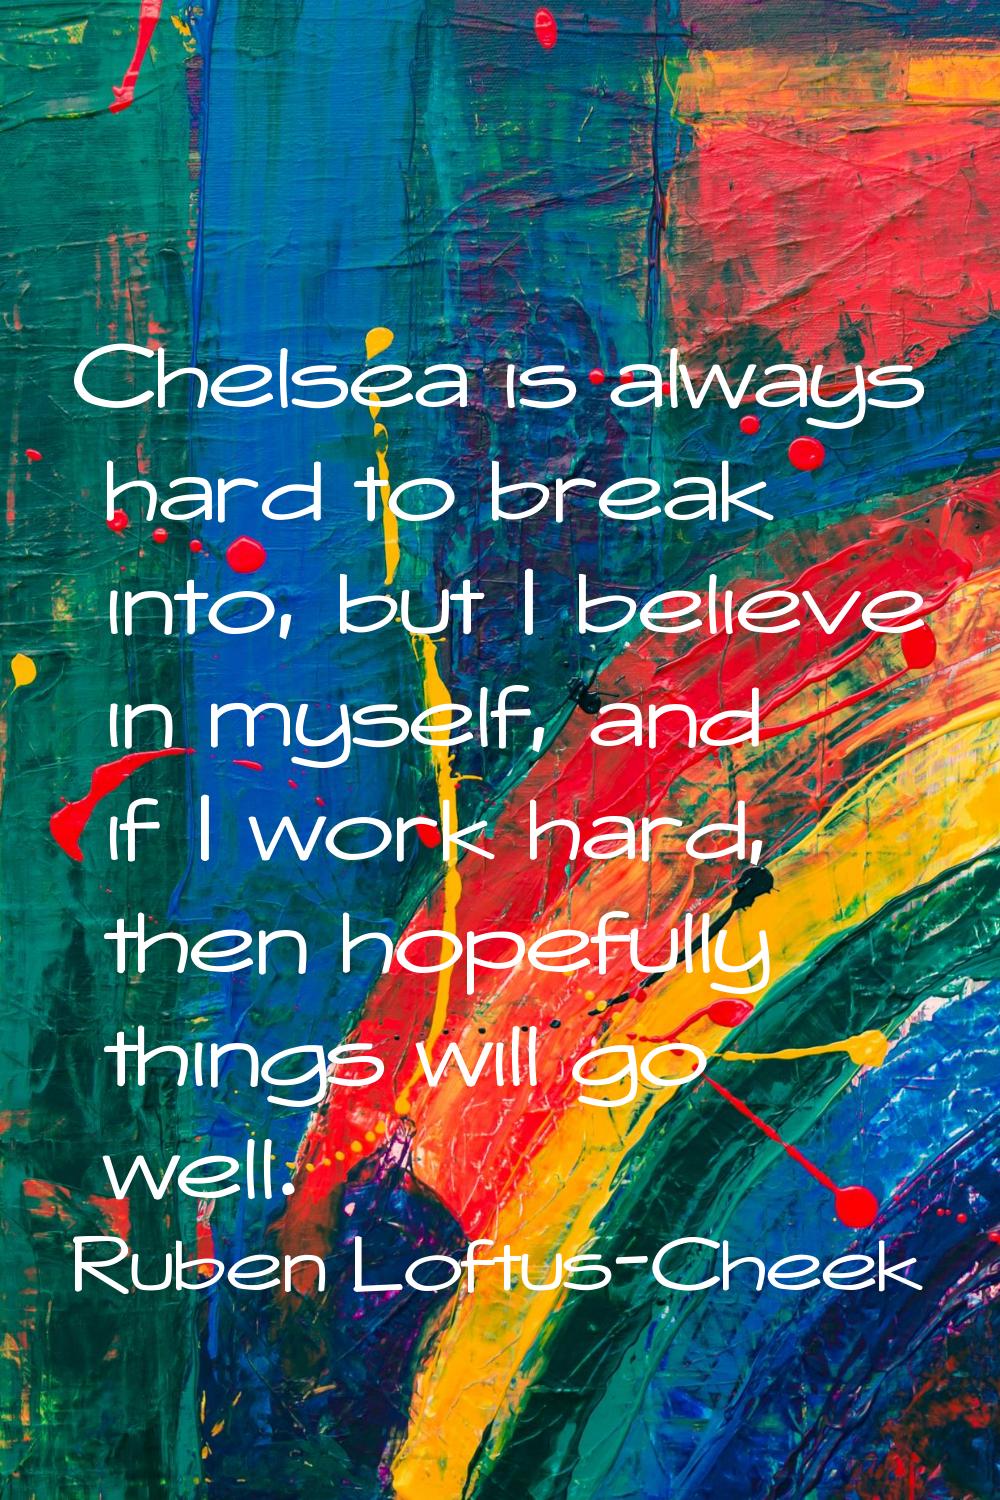 Chelsea is always hard to break into, but I believe in myself, and if I work hard, then hopefully t